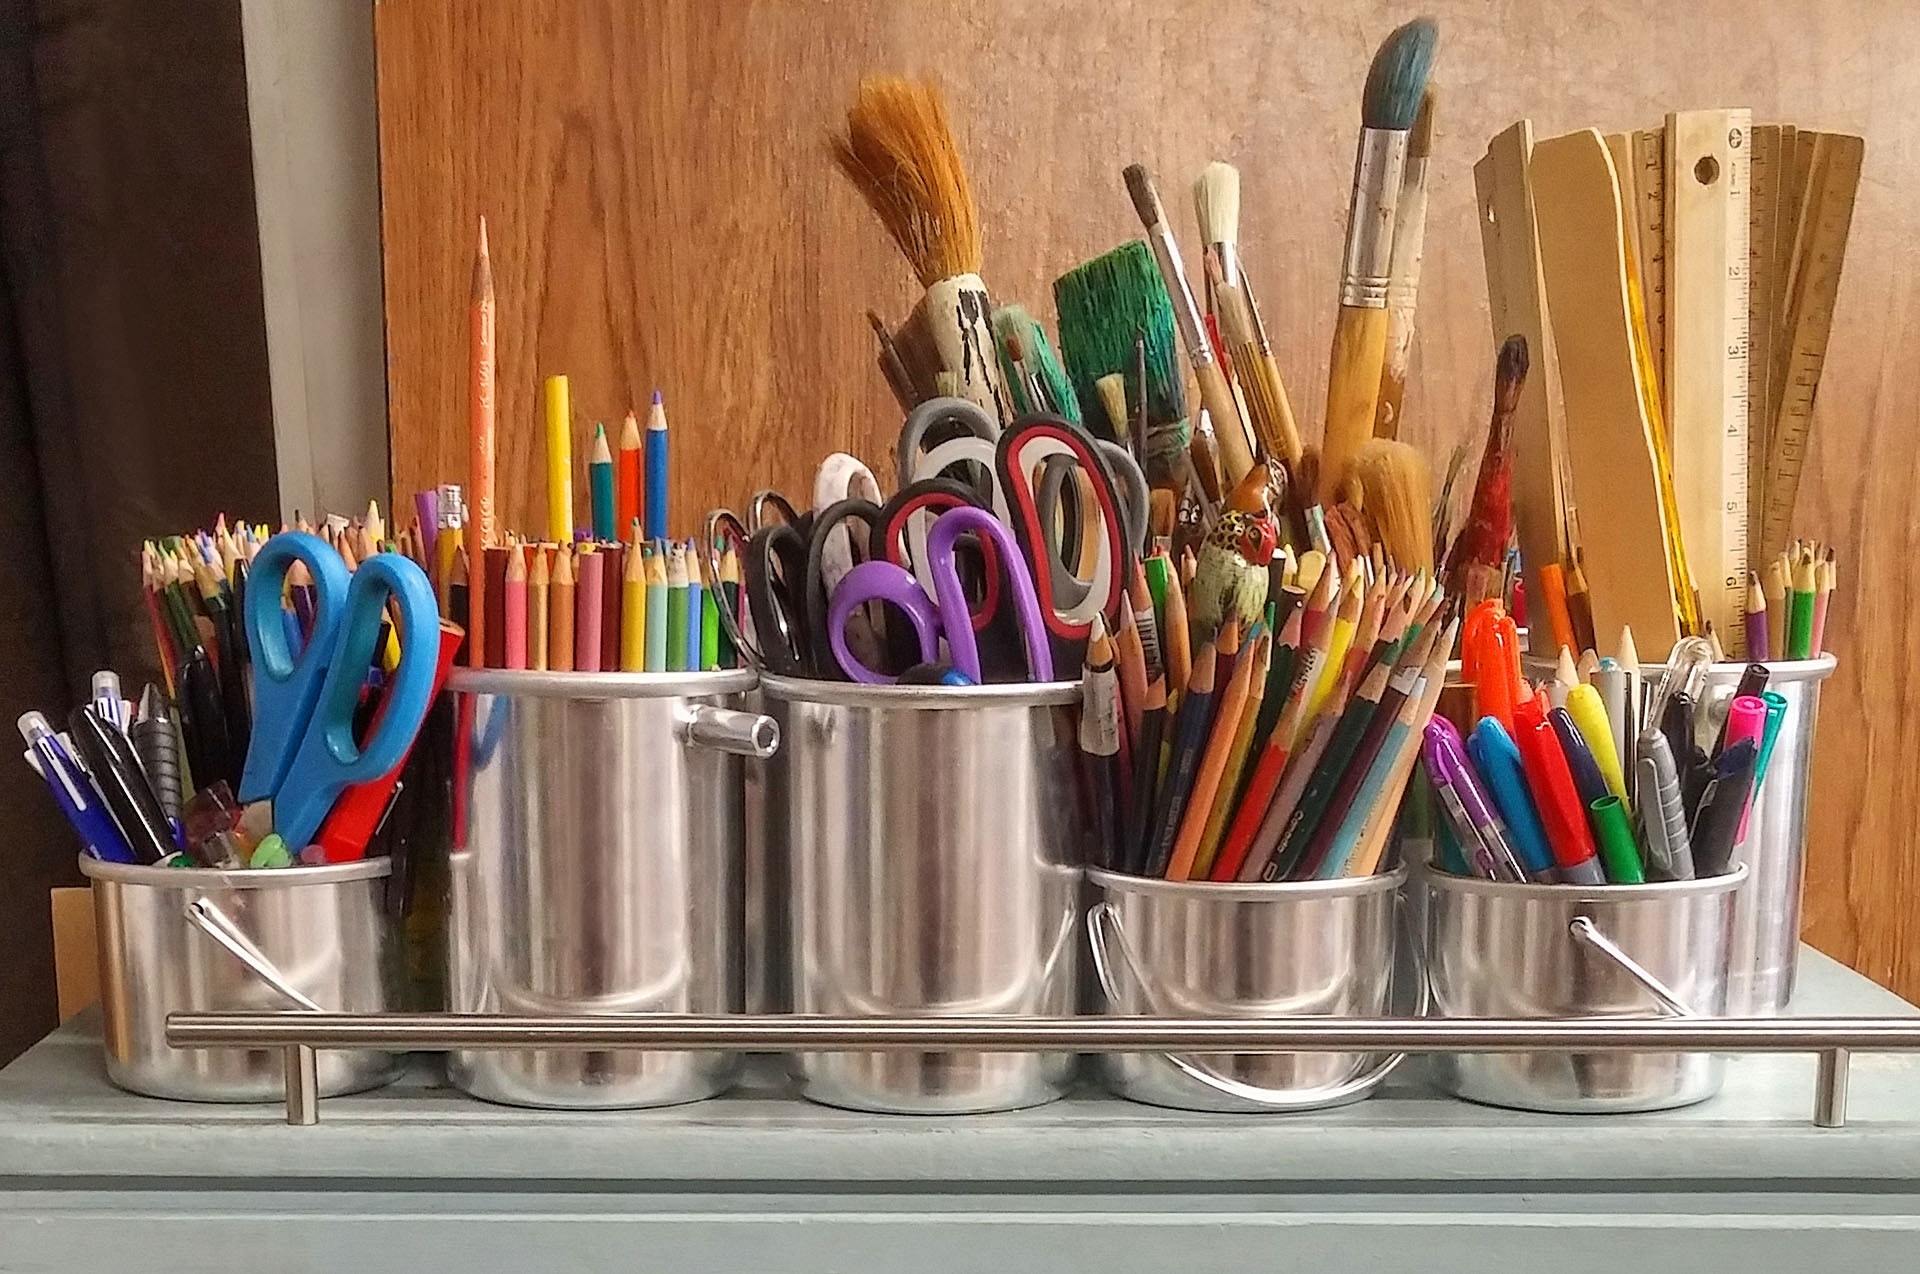 Row of craft supplies in stainless steel pots